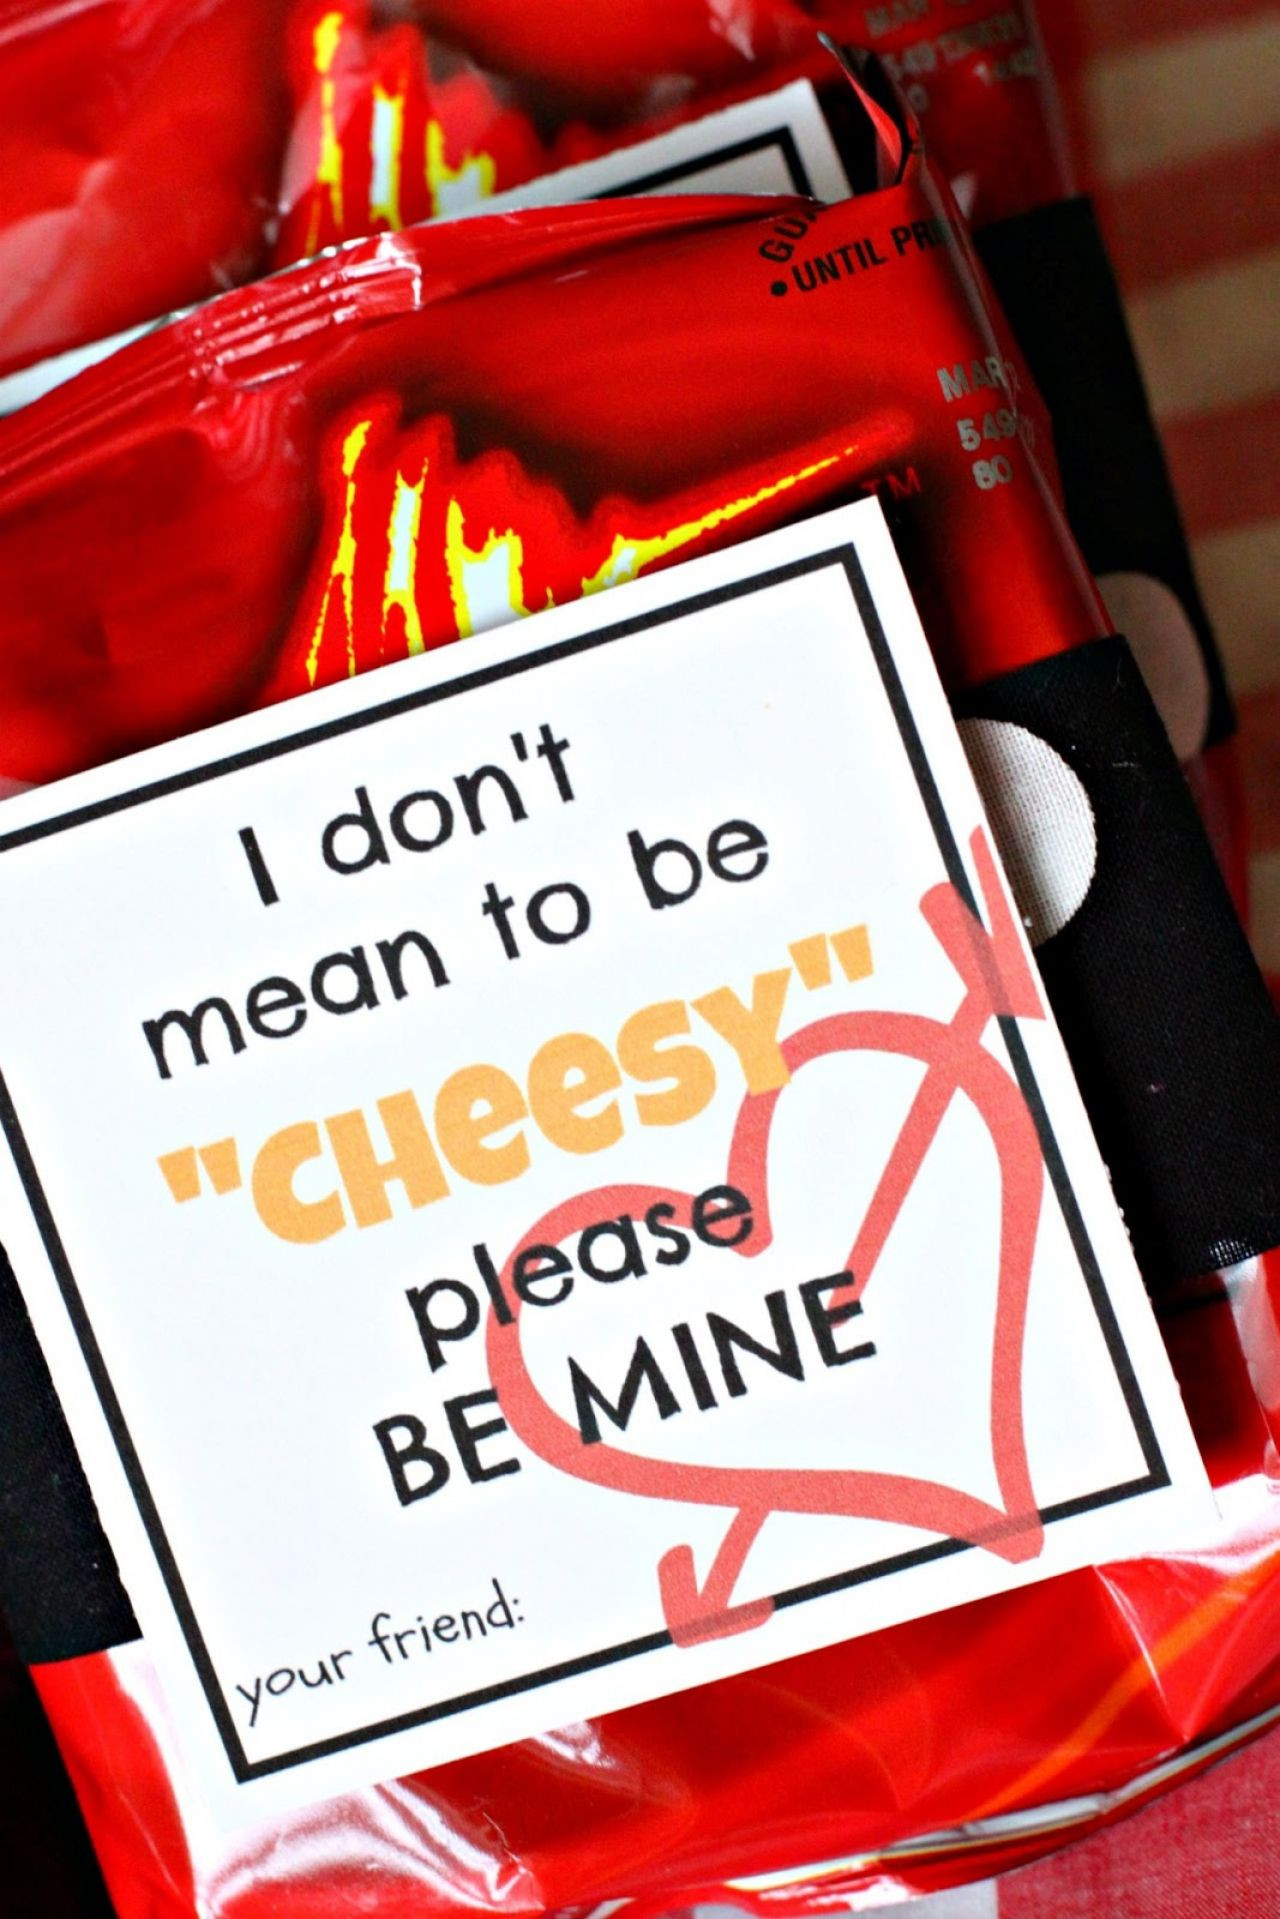 Cheesy Valentines Day Quotes
 Cheesy Valentines Day Quotes QuotesGram